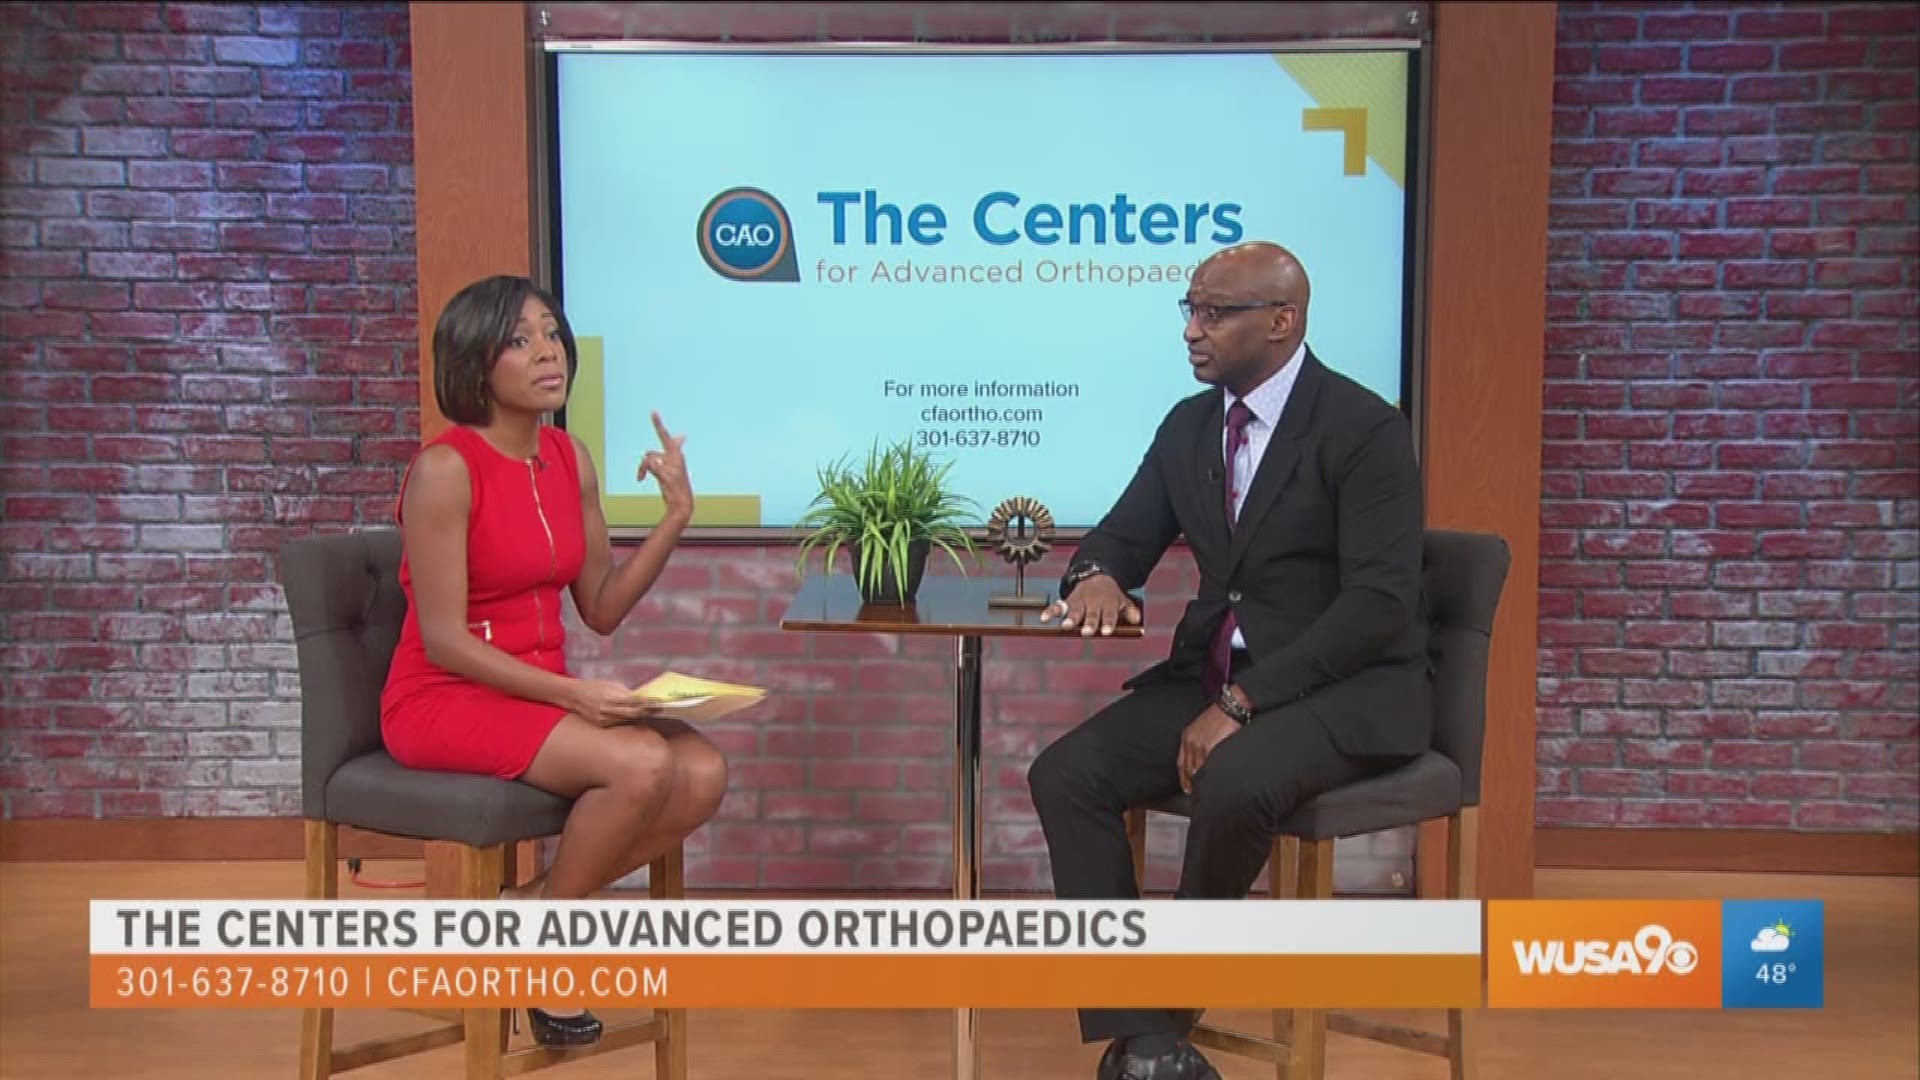 Dr. Ricardo Cook, with The Centers for Advanced Orthopaedics shares some professional advice on how to keep your feet and ankles healthy during the winter months. For more information contact Dr. Cook or an Orthopaedic Specialist by calling 301-637-8710 o